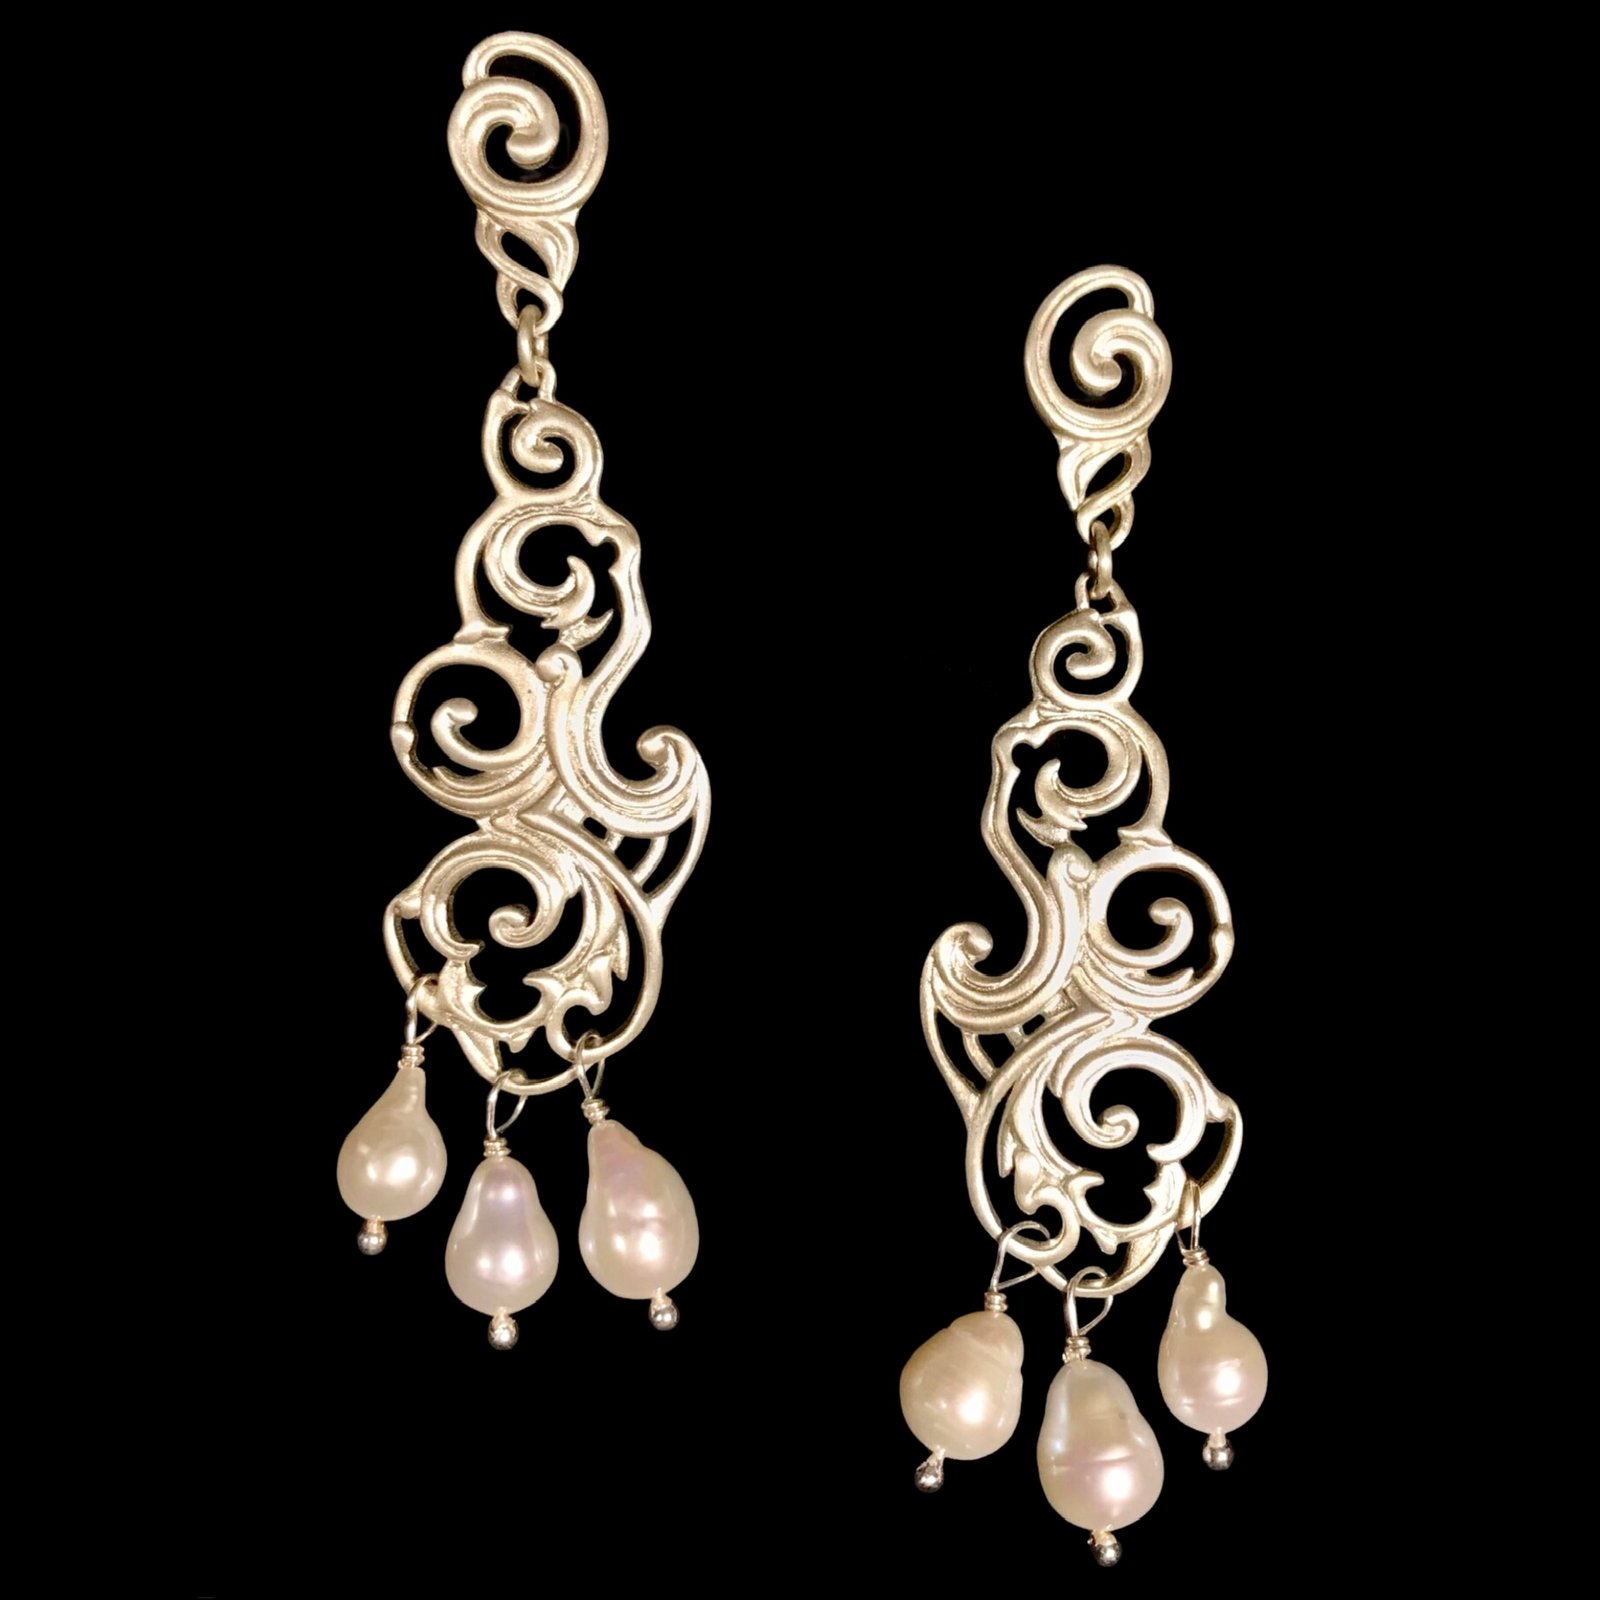 NUAGES BAROQUE Big Earring - 3 Pearls - Various Colours | ZARAH VOIGT